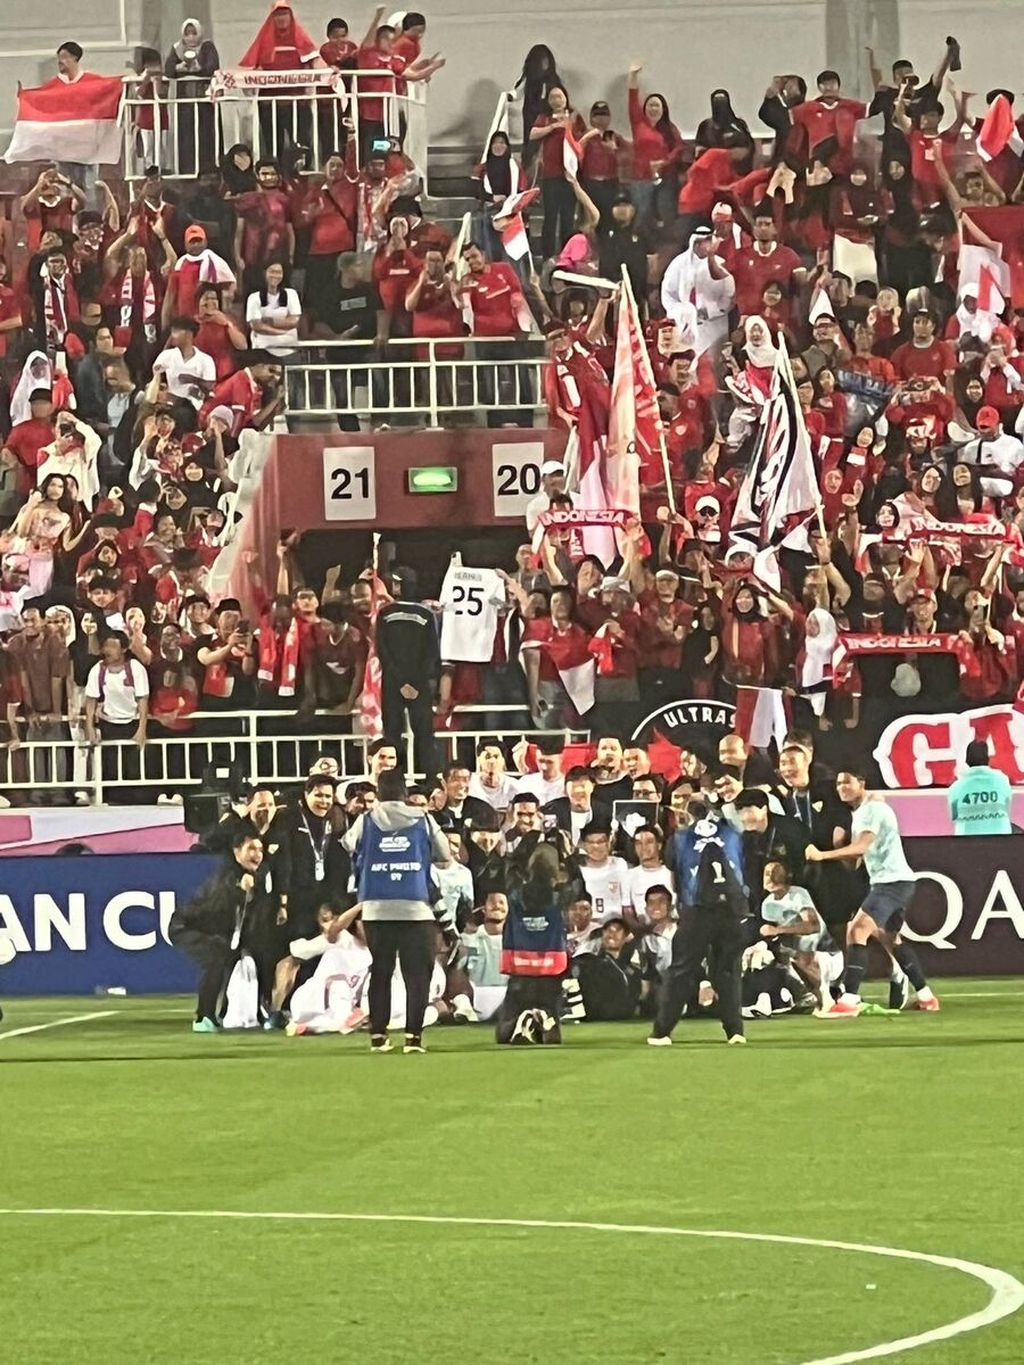 Indonesian players and officials were photographed together in front of the Ultras Garuda Qatar supporter group who remained faithful in their support during Indonesia's match against South Korea in the quarterfinals of the 2024 Asian Cup U-23 at the Abdullah bin Khalifa Stadium in Doha, Qatar on Friday (26/4/2024).